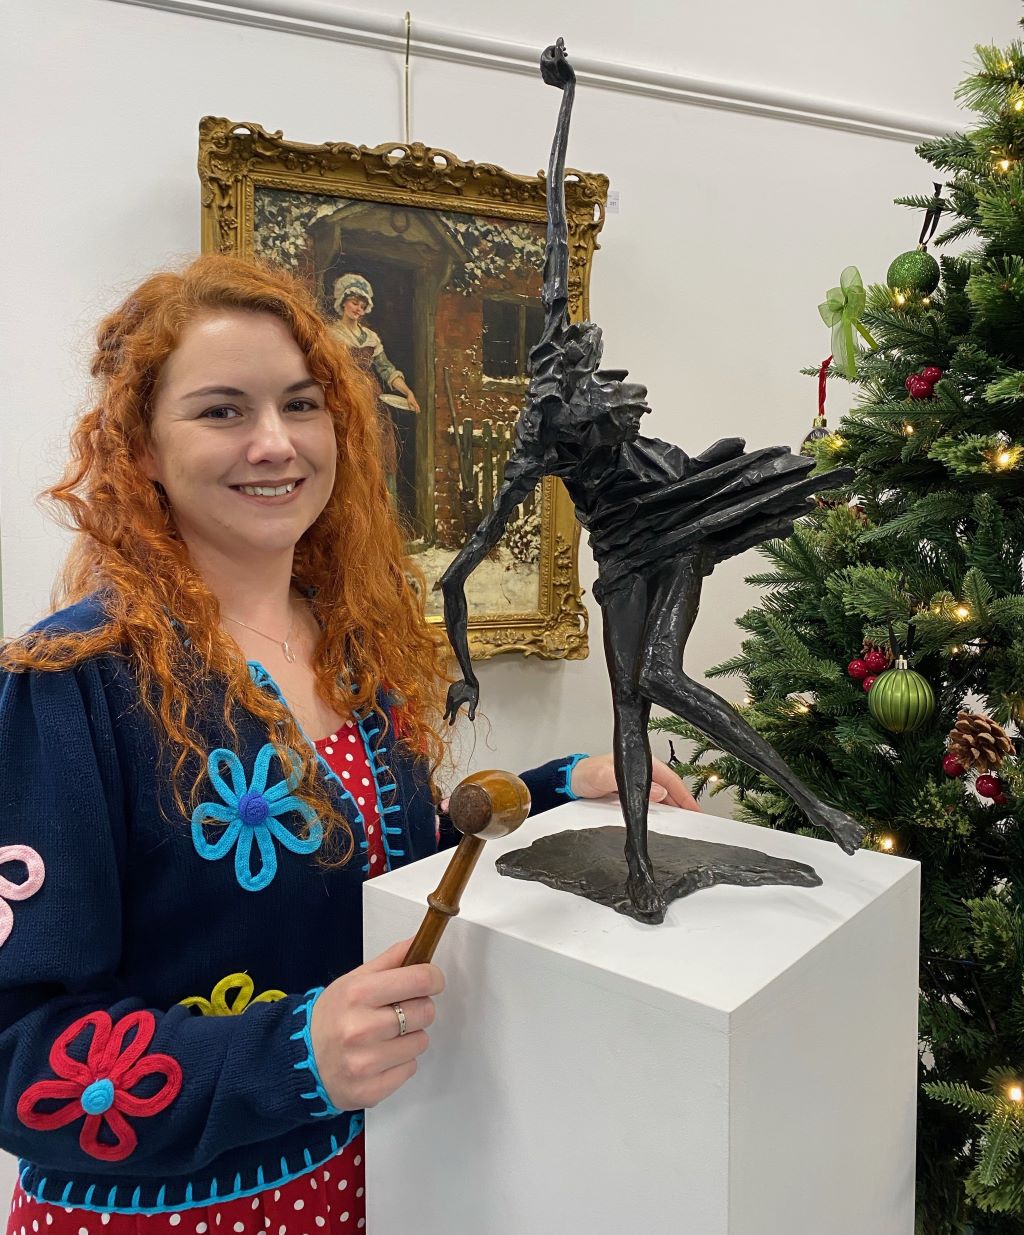 Fine art specialist Abigail Molenaar with the bronze sculpture by celebrated Irish artist Frederick Edward McWilliam which sold for £37,000.